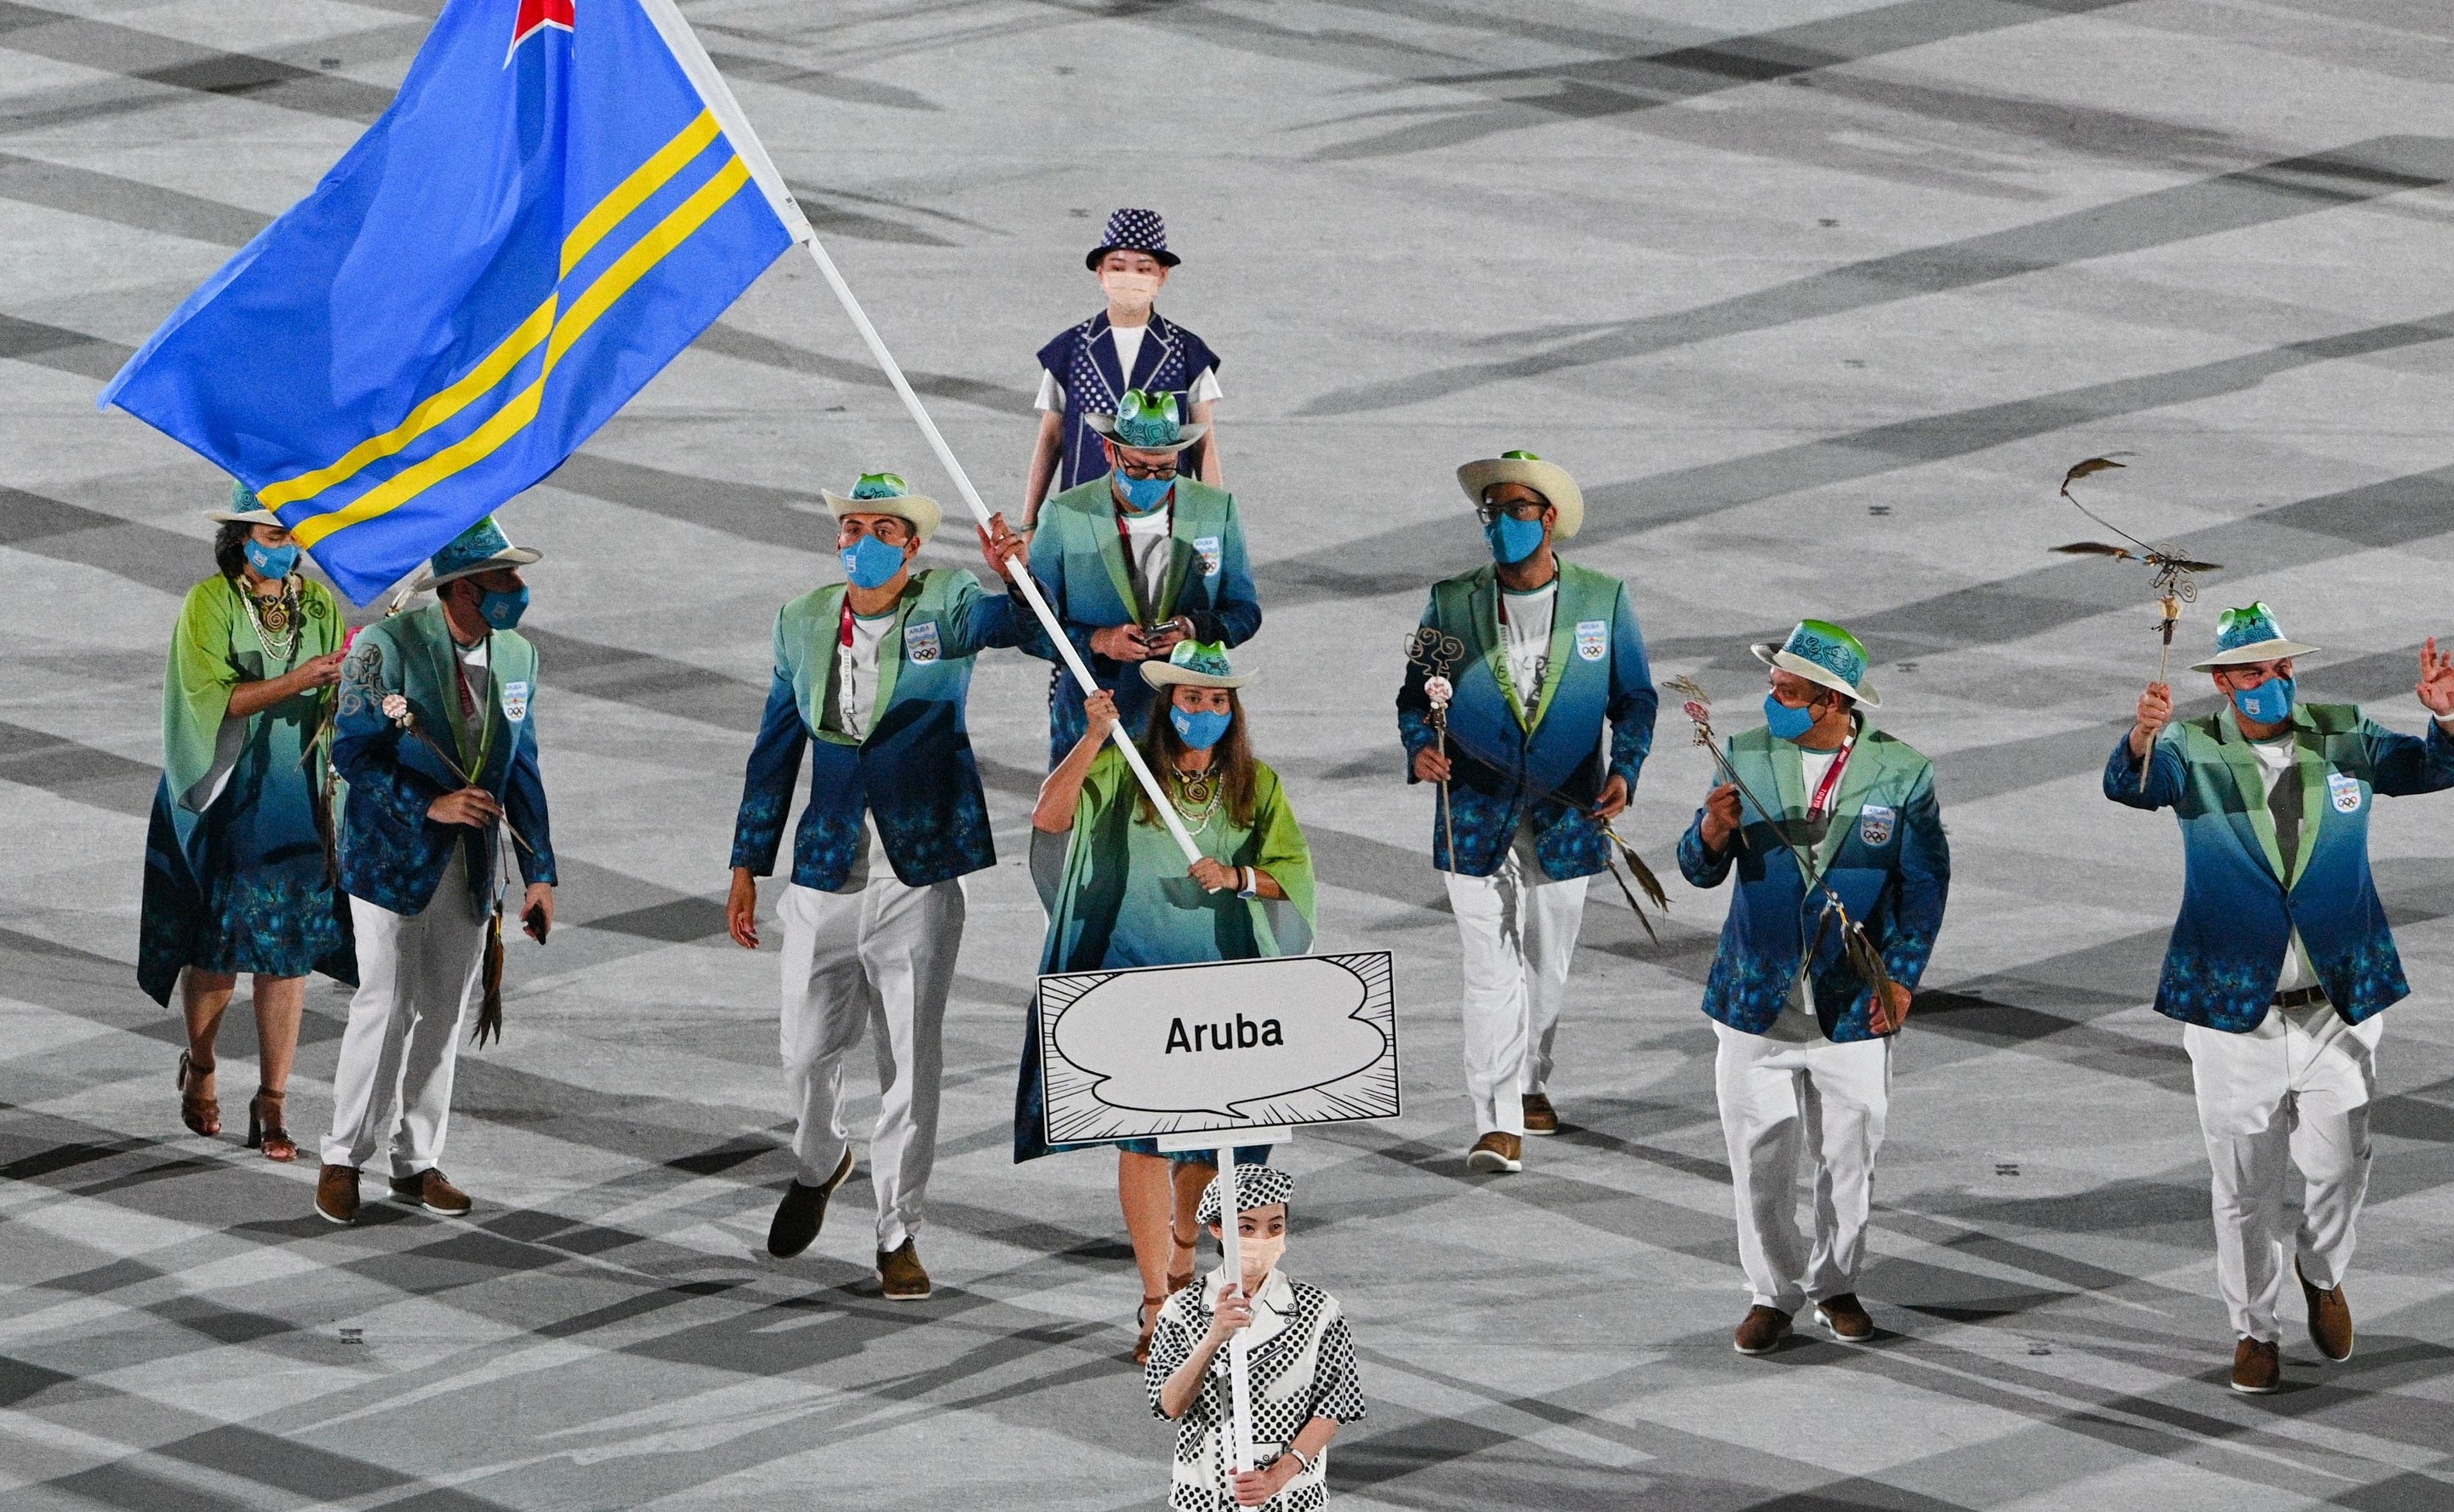 The athletes wore multi-colored blazers and light pants or dark skirts